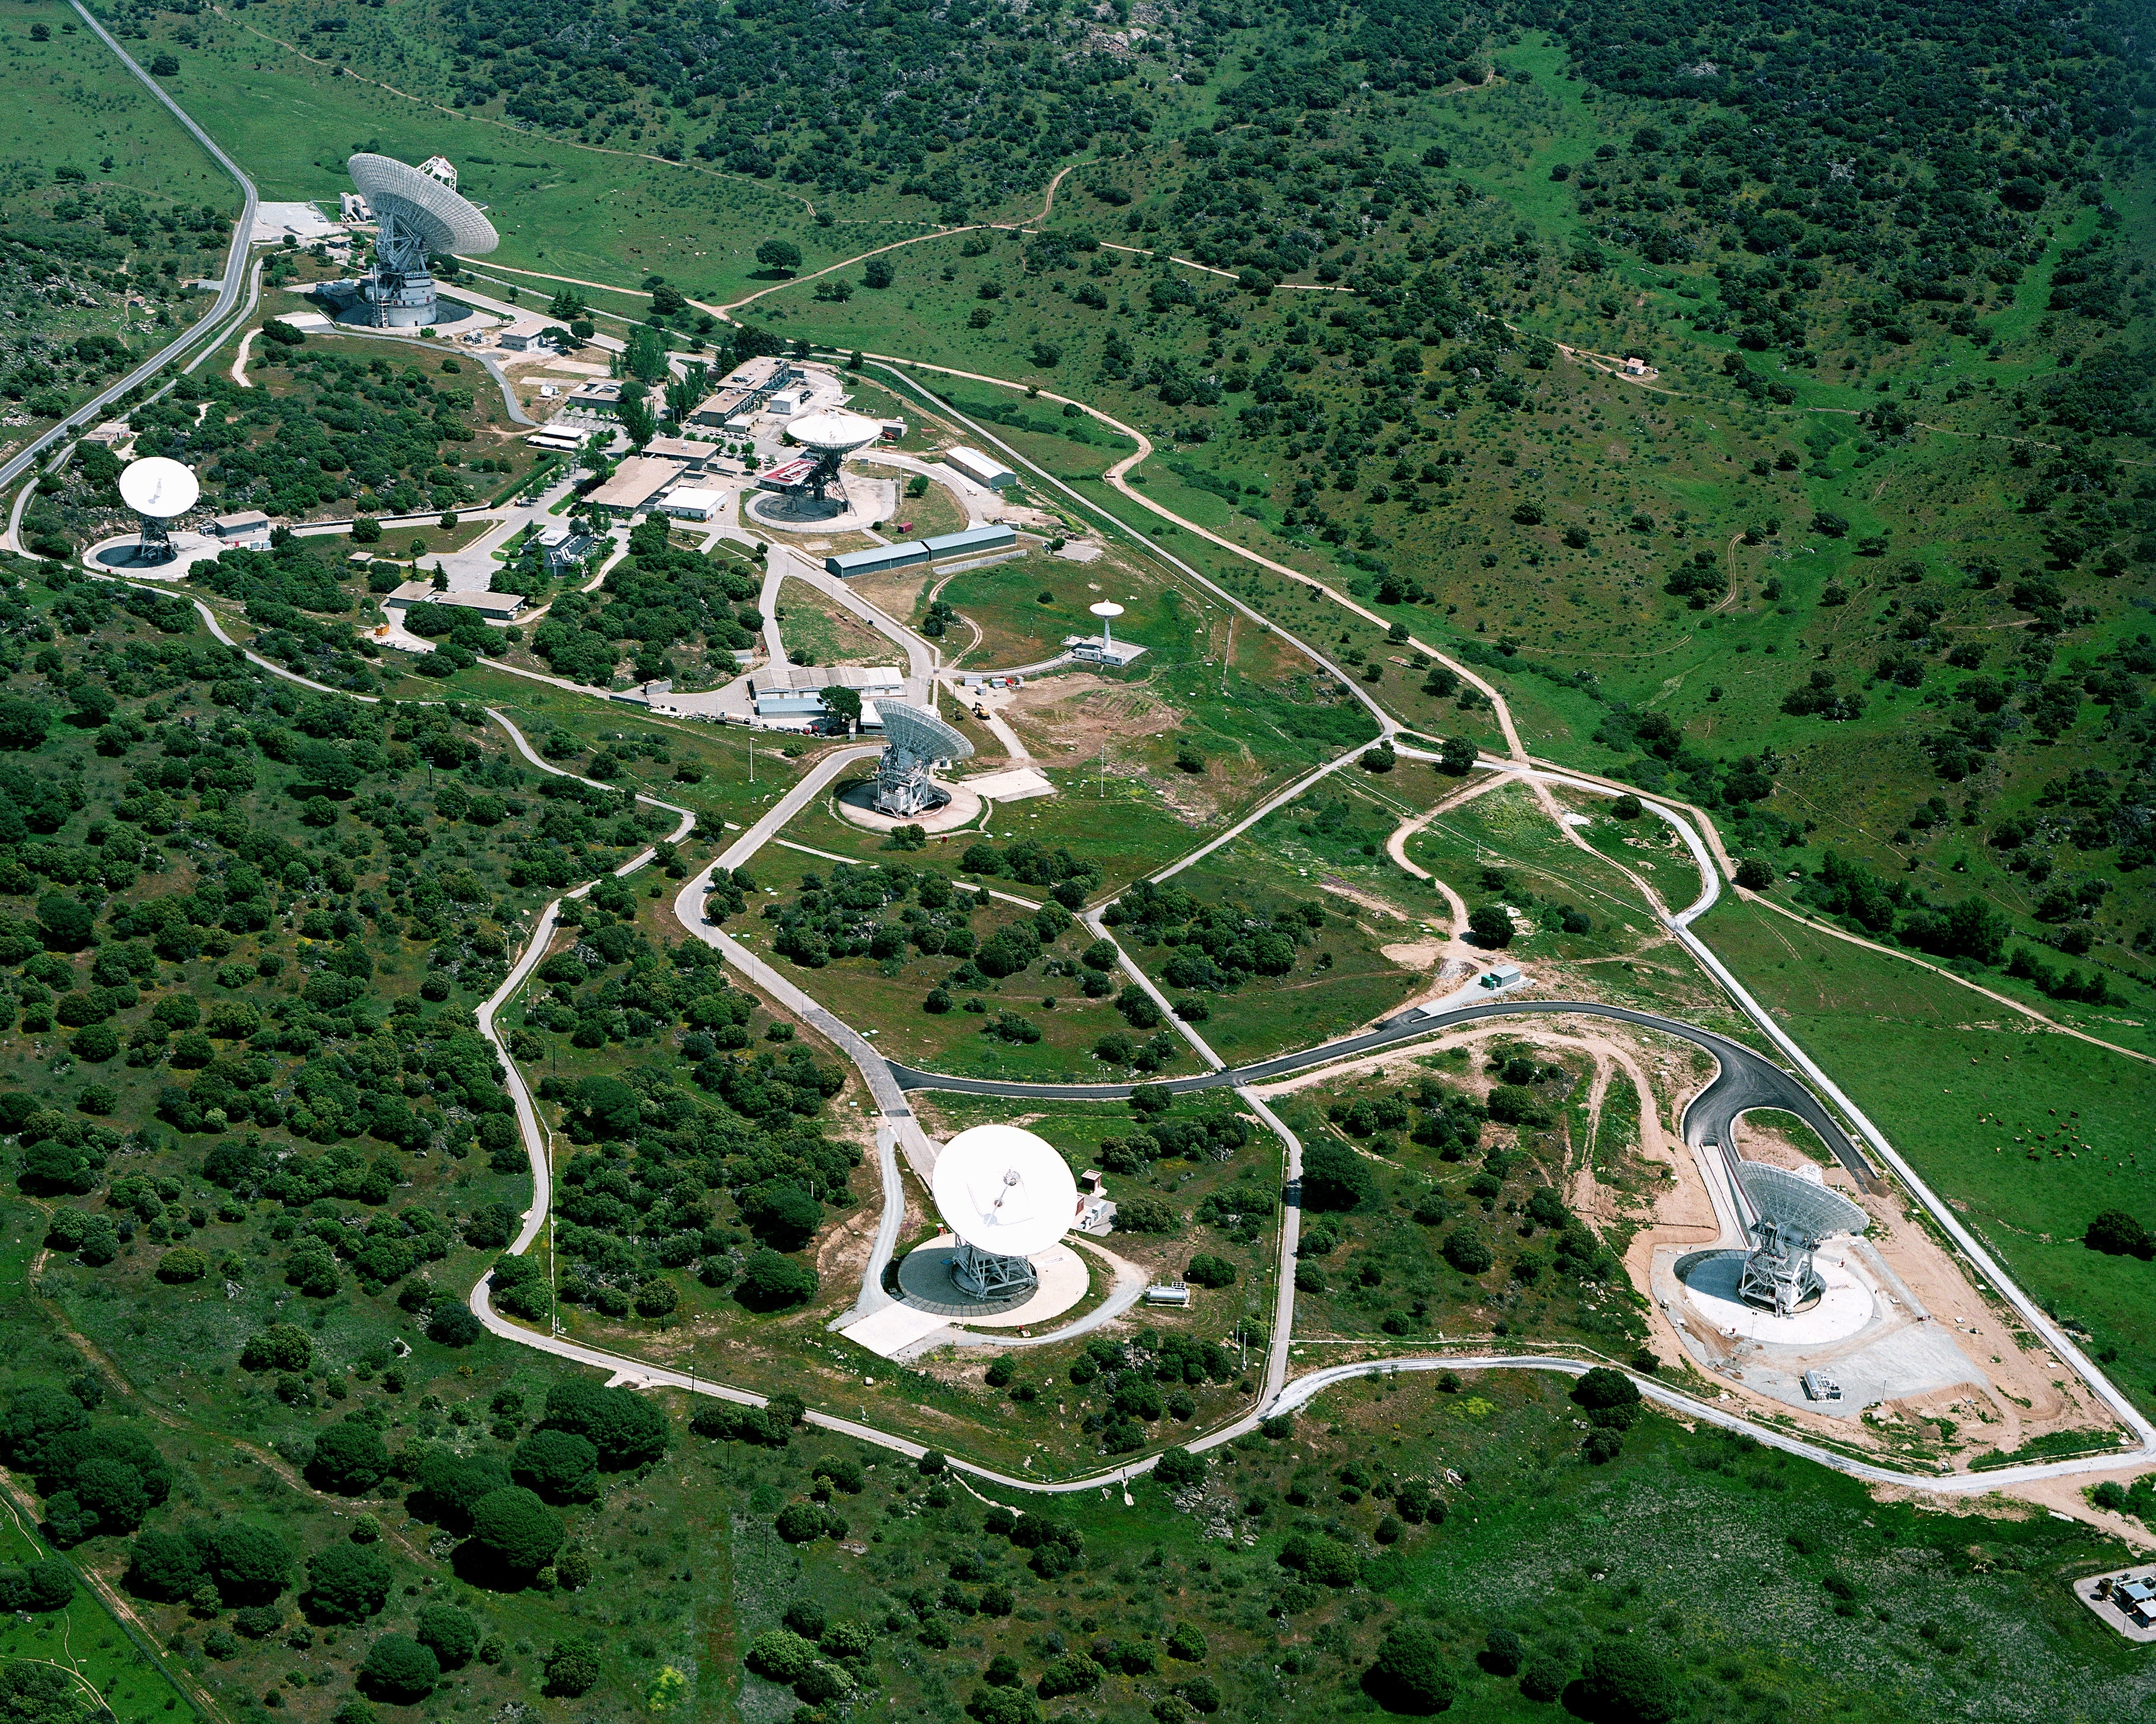 The Madrid Deep Space Communications Complex stretches across a lush, green landscape. Several antennas can be seen towering over surrounding buildings and roads.